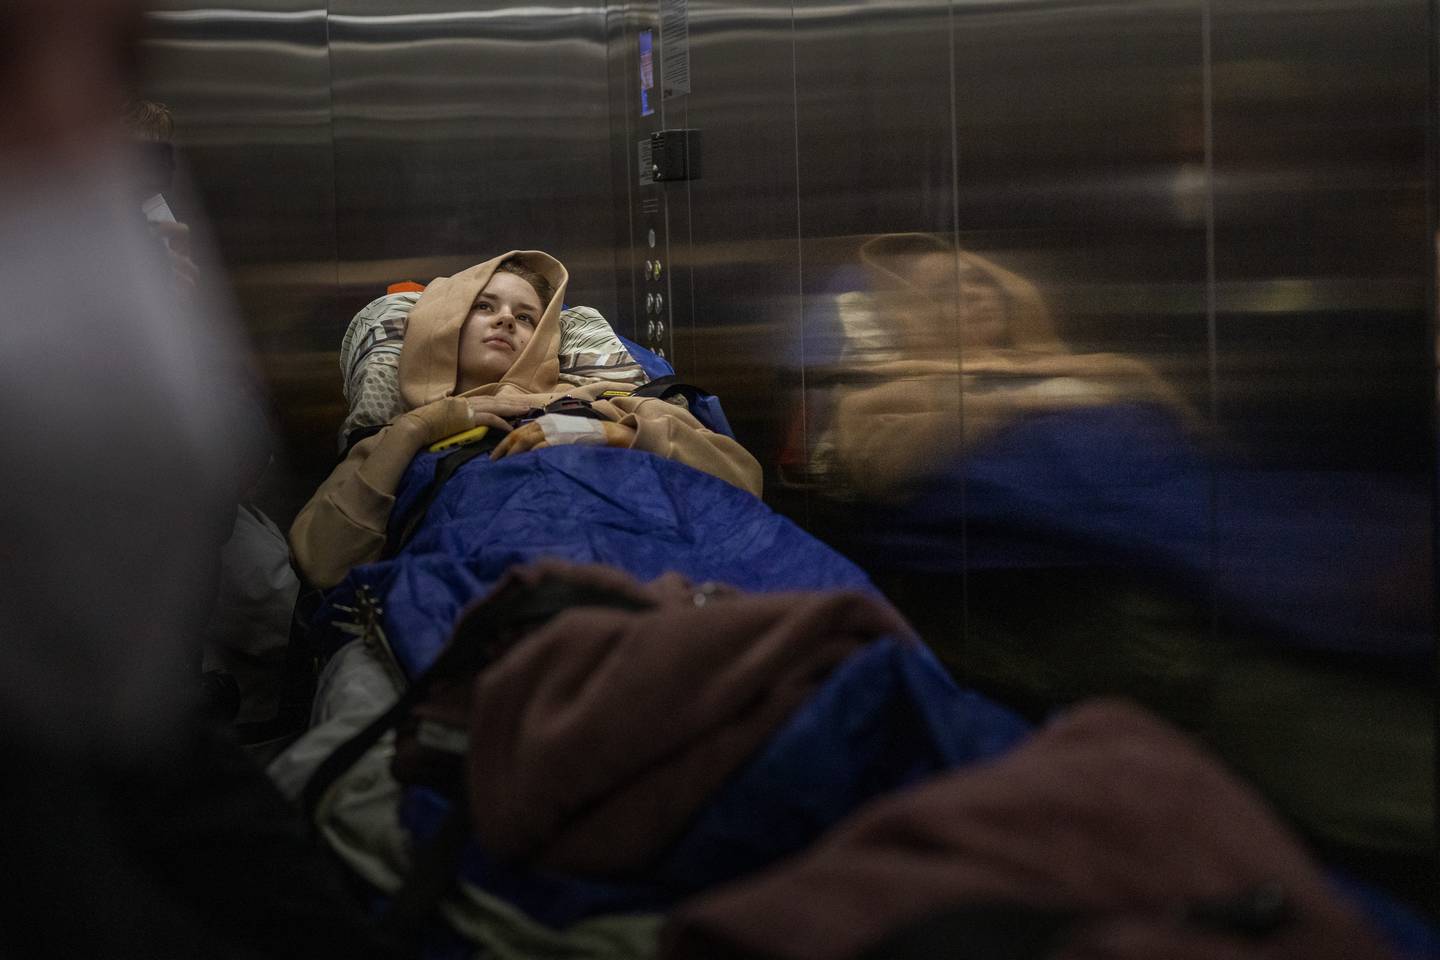 Nastia Kuzik, 21, is carried on a stretcher in a lift while being transported by a medical team to Germany, at a public hospital in Kyiv, Ukraine, Thursday, May 5, 2022. In the morning on March 17, she went to her brother's house in Chernihiv, then on her way back was caught in a bombing. She lost her right leg below the knee and seriously injured her left leg. Has now been transported to Germany for further treatment. (AP Photo/Emilio Morenatti)